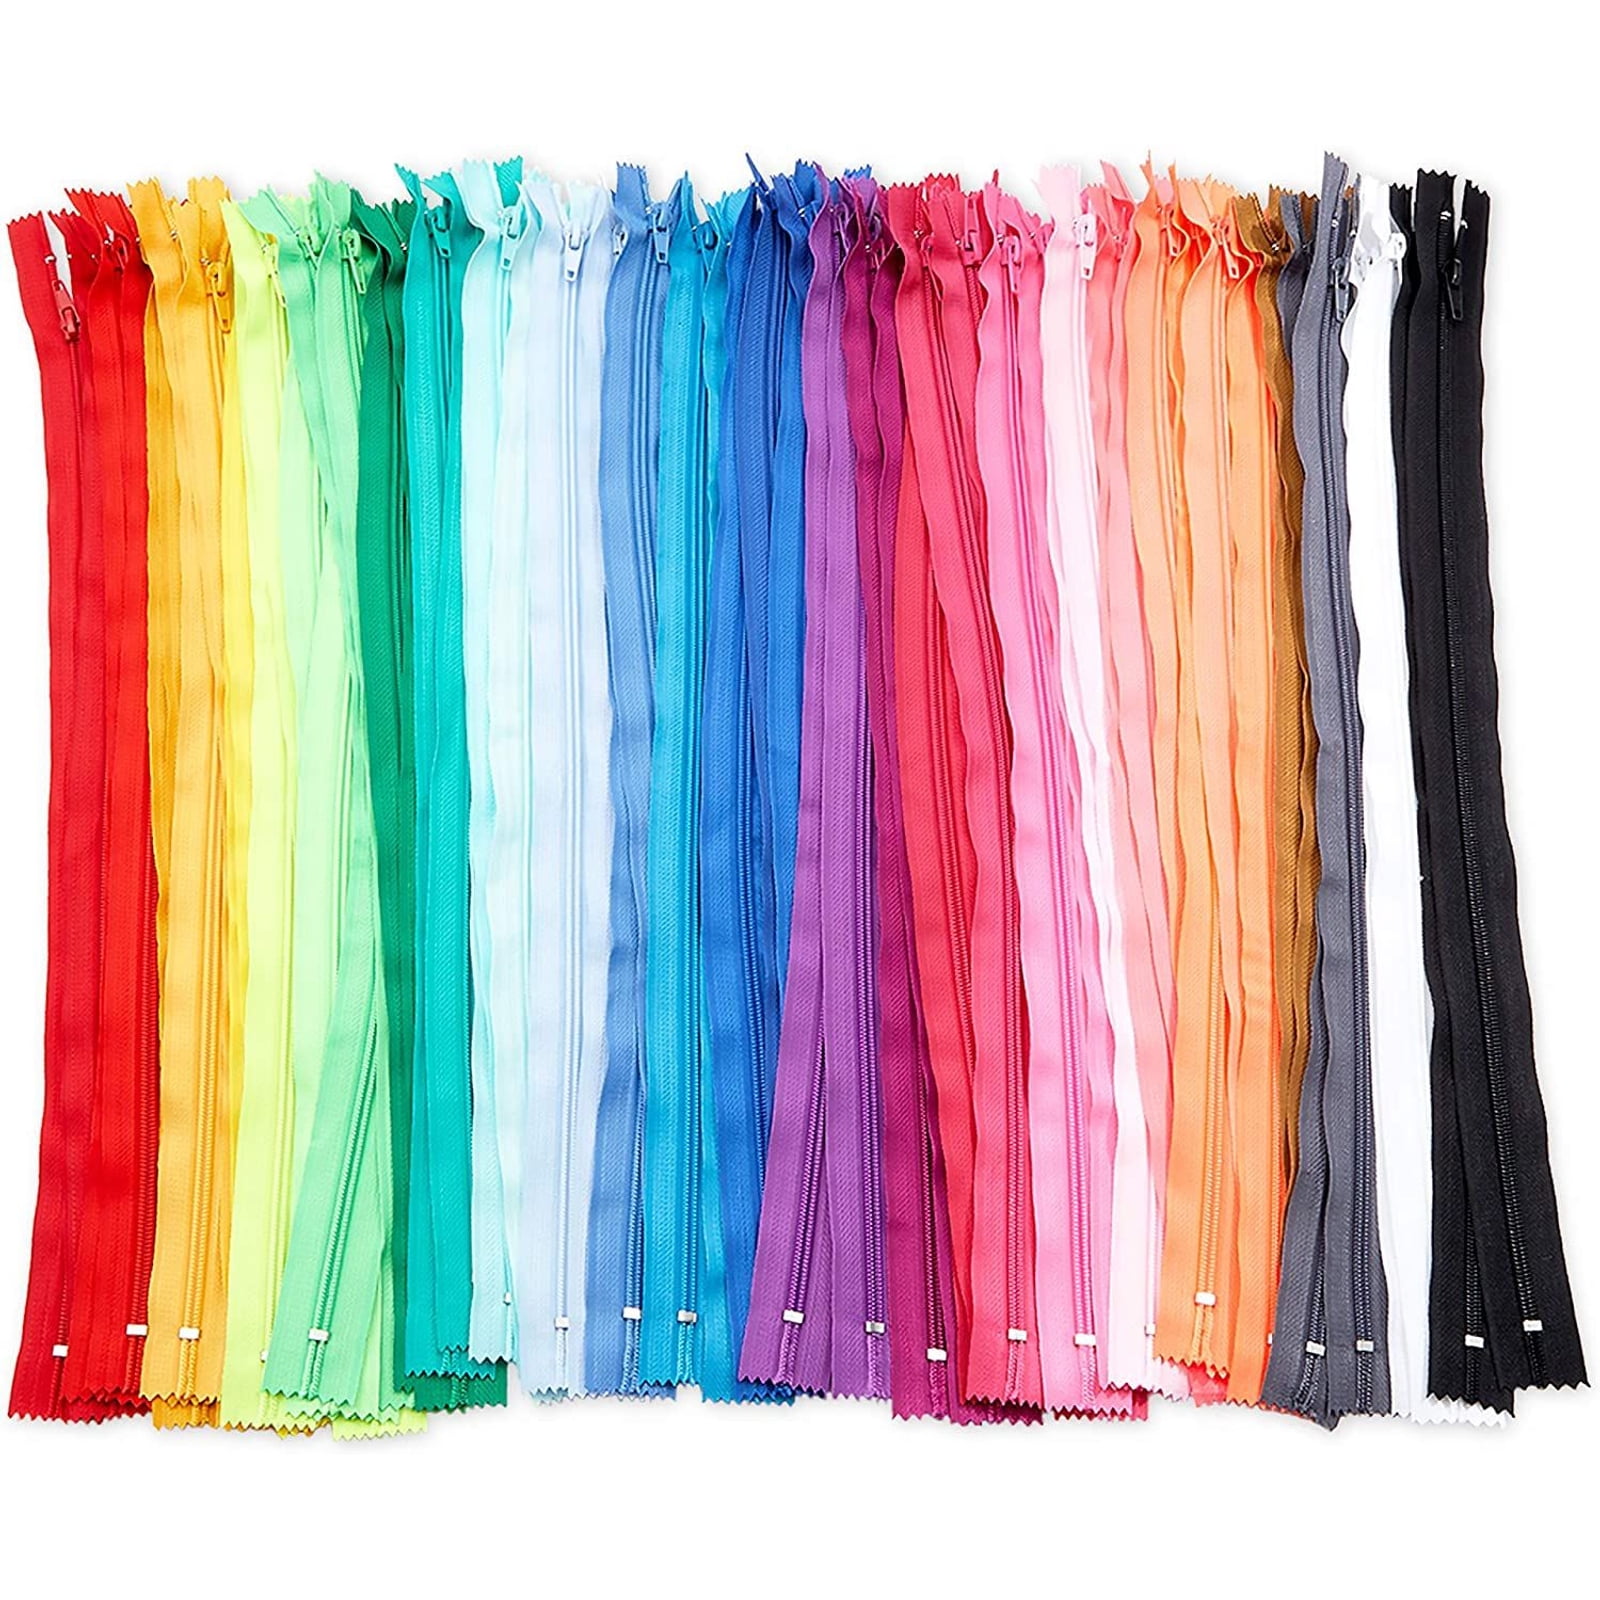 60 Pcs 7 Inch 18cm Nylon Closed Ended Zip Zippers for Tailor Sewer Craft Sewing Clothes 